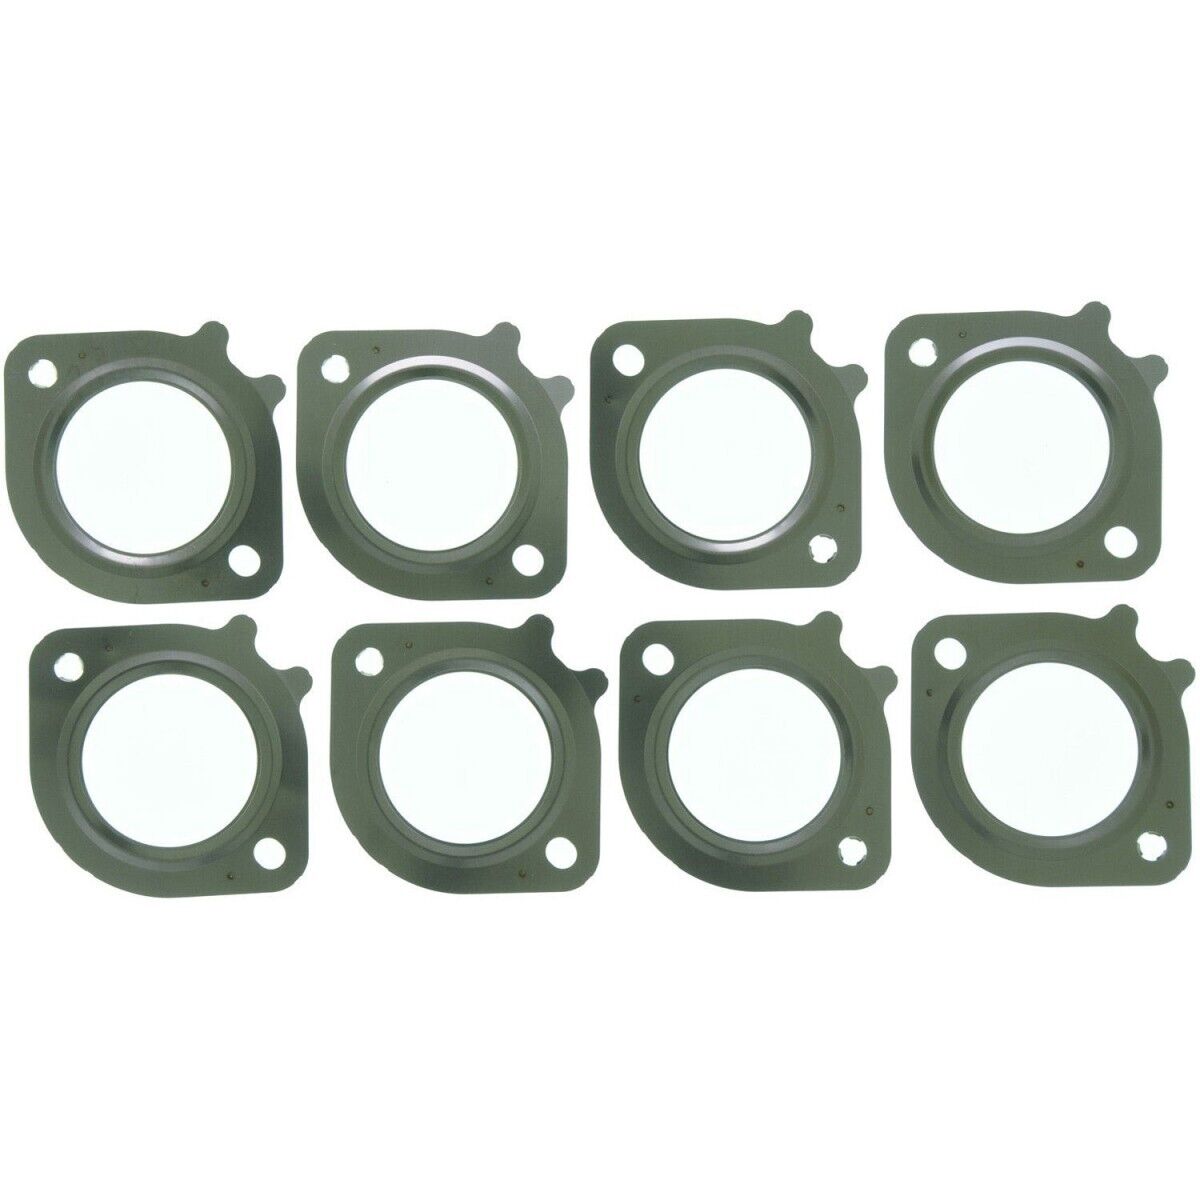 MS19393A Mahle Set Exhaust Manifold Gaskets for Mercedes C Class CL CLK CLS E G